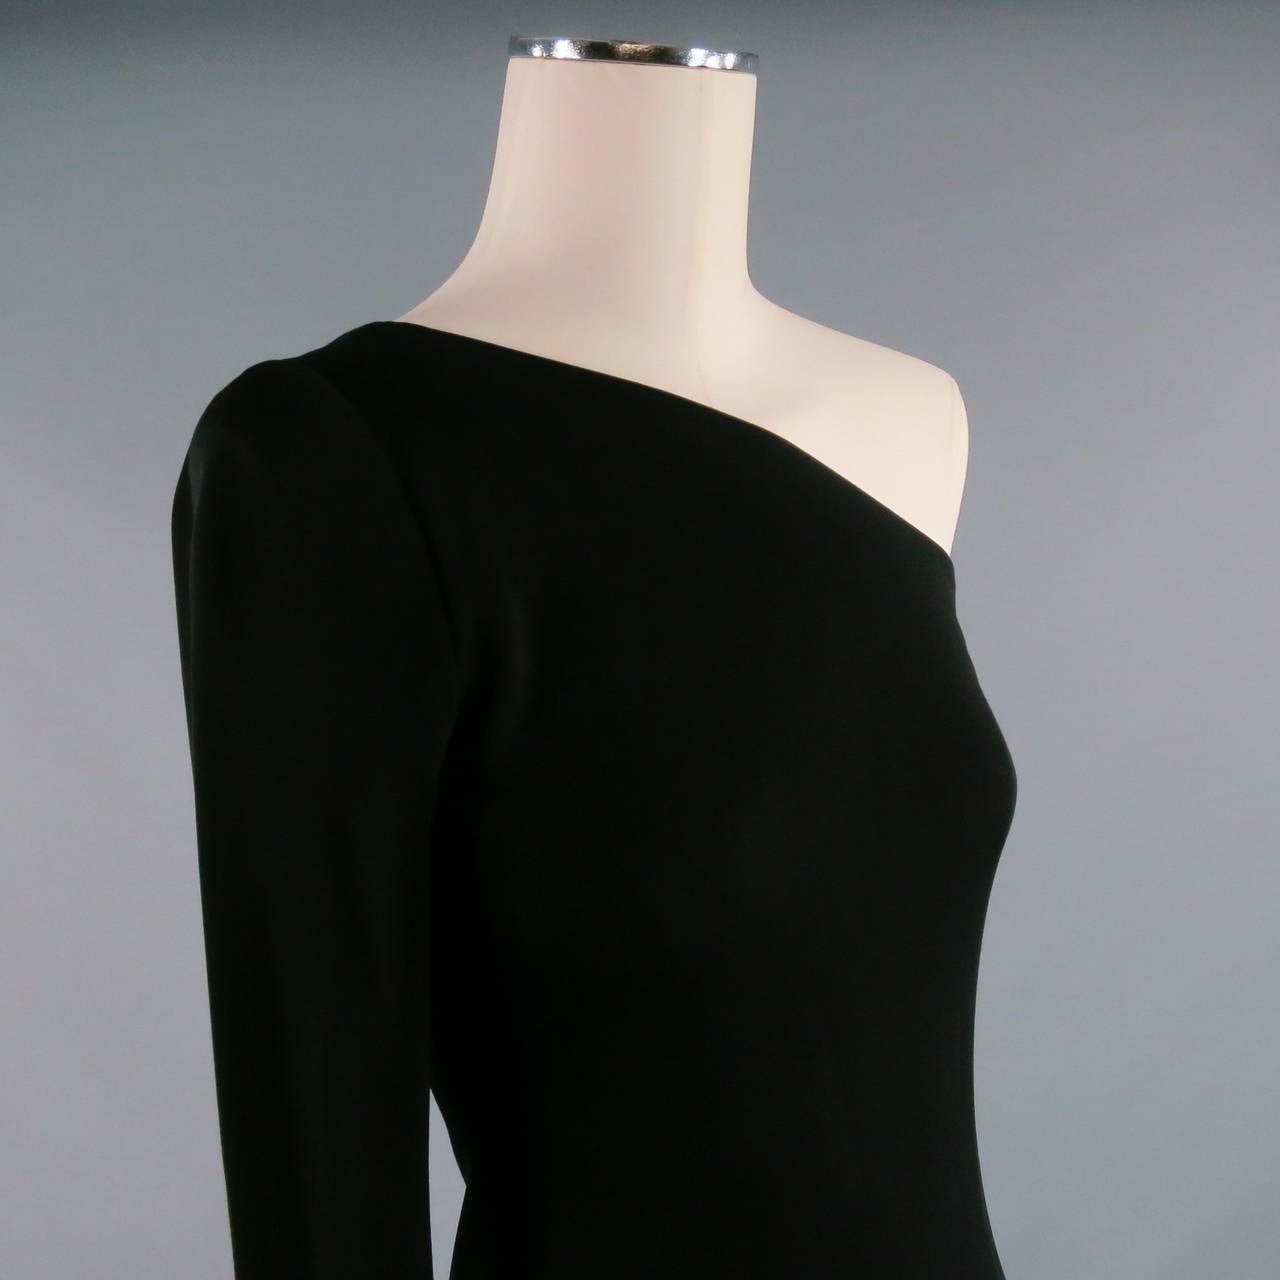 Amazing Collection by RALPH LAUREN dress, full length in a black viscose jersey.  Sleek one shoulder, one long sleeve design with a flattering diagonal at neckline, front and back.  Fully lined, side zip invisible closure.  Made in USA.
